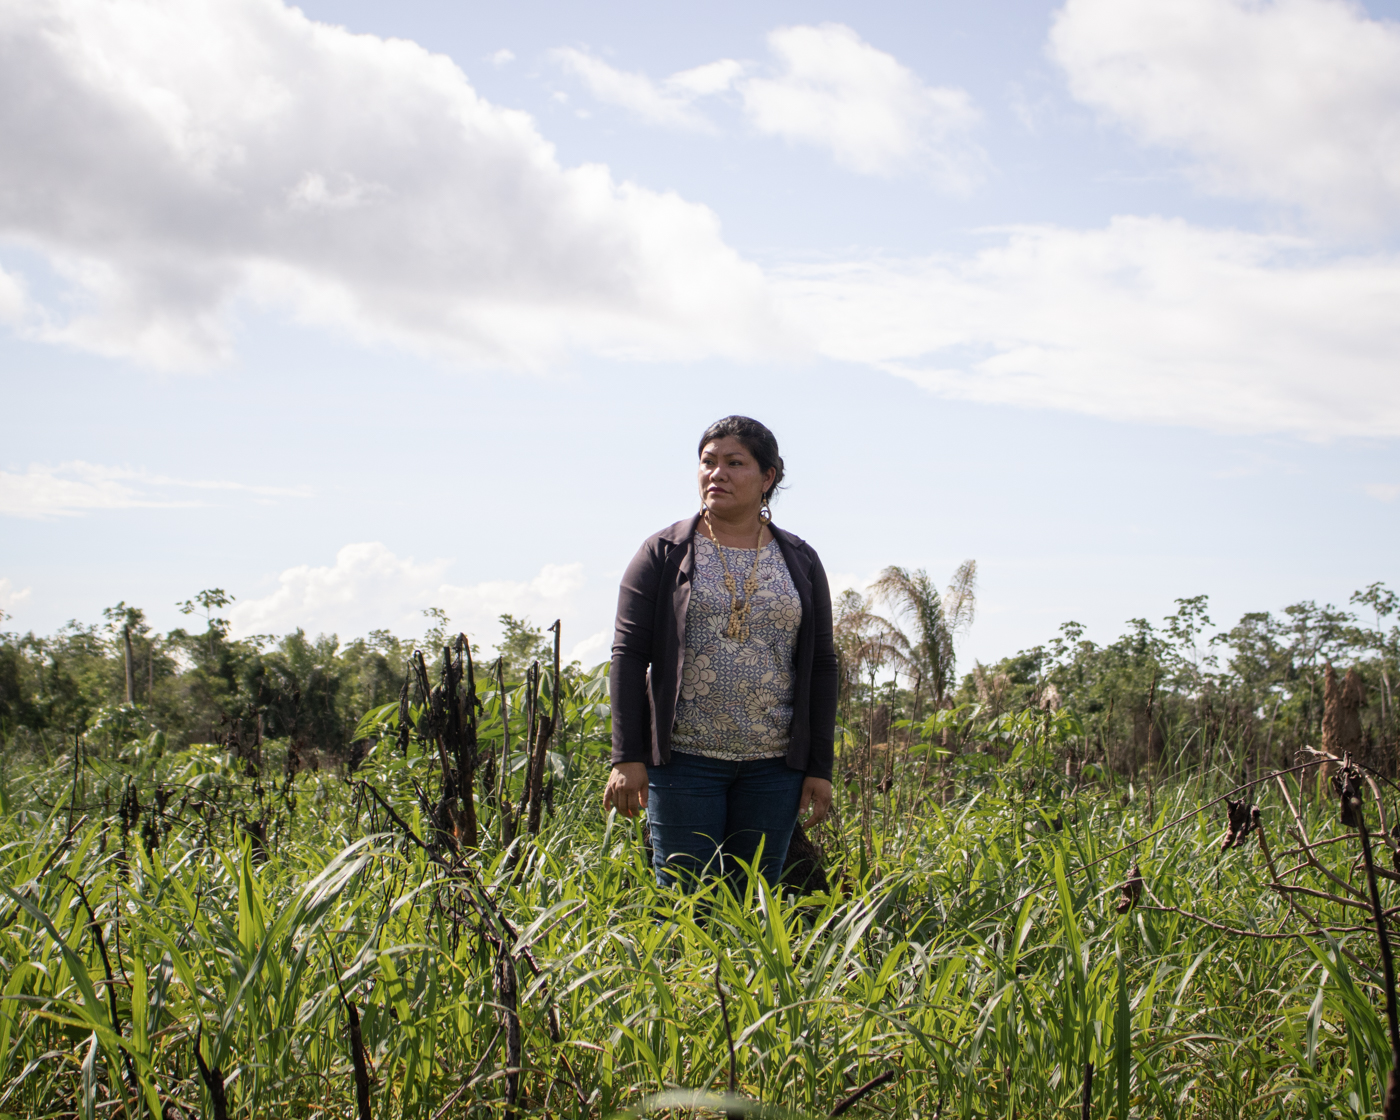 Since becoming the tuxaua of Novo Paraíso, Maria Loreta Pascoal has taken on the job of warning the community about the risks of deforesting new areas for farming. There’s enough cleared land for sustainable rotational farming, she says.